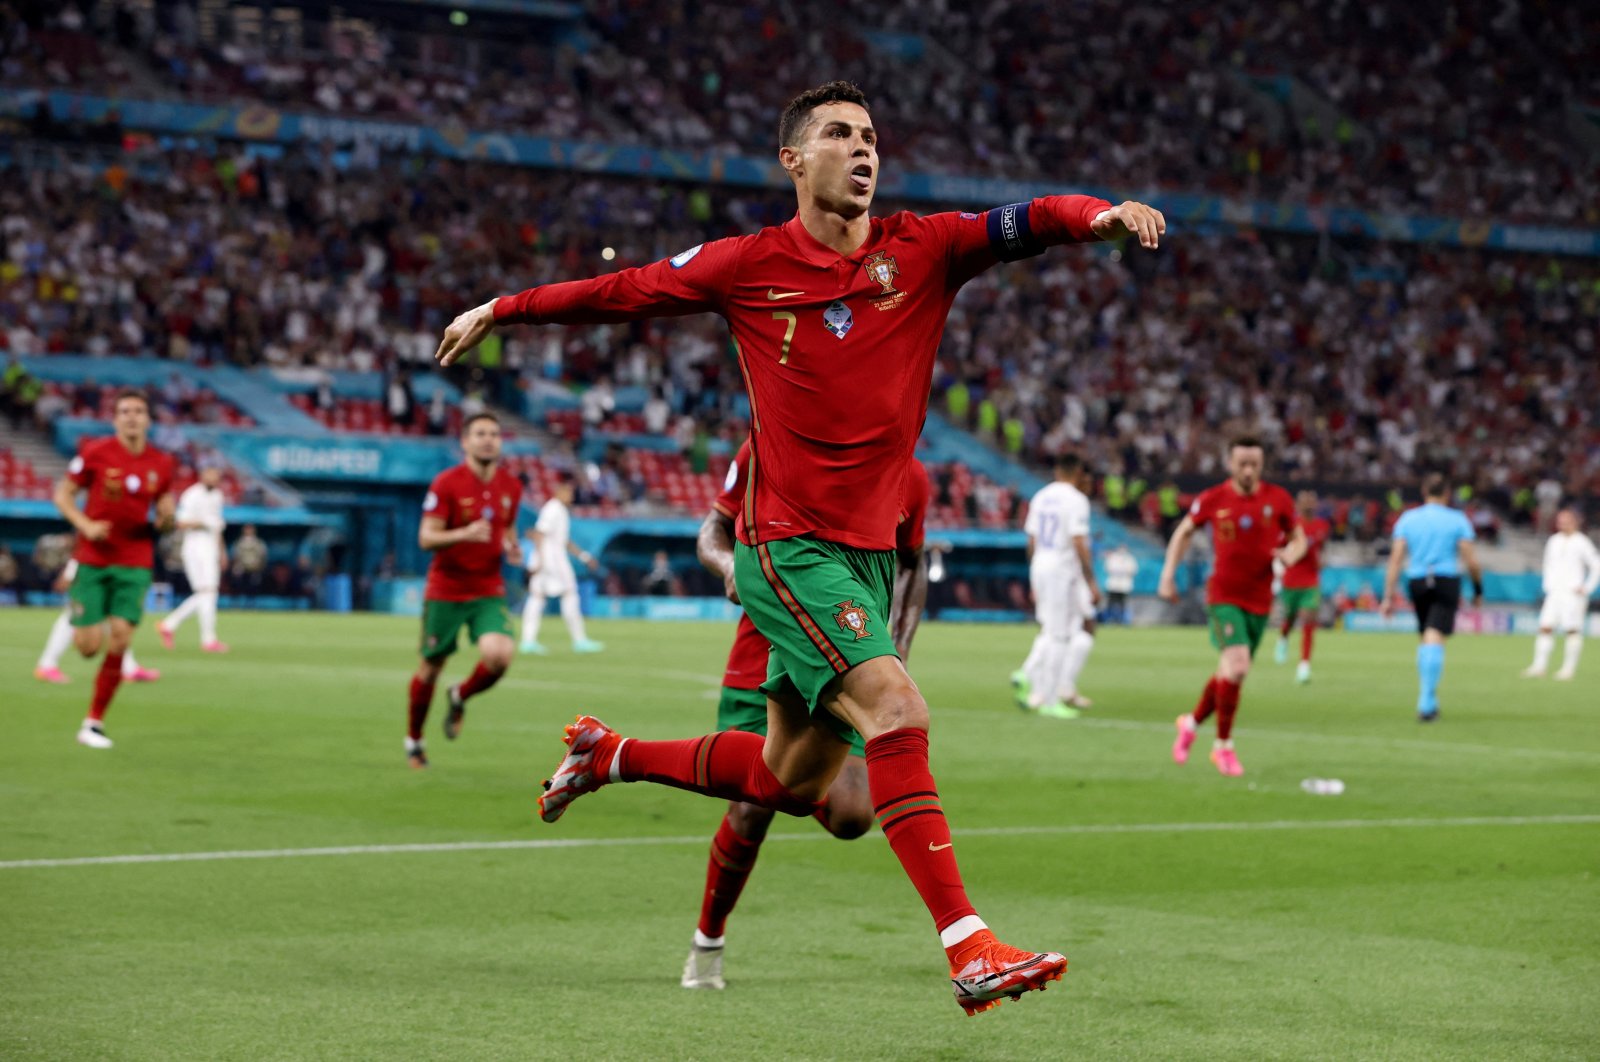 Portugal&#039;s Cristiano Ronaldo celebrates scoring their second goal against France during the Euro 2020, Group F match at the Puskas Arena, Budapest, Hungary, June 23, 2021. (Reuters Photo)